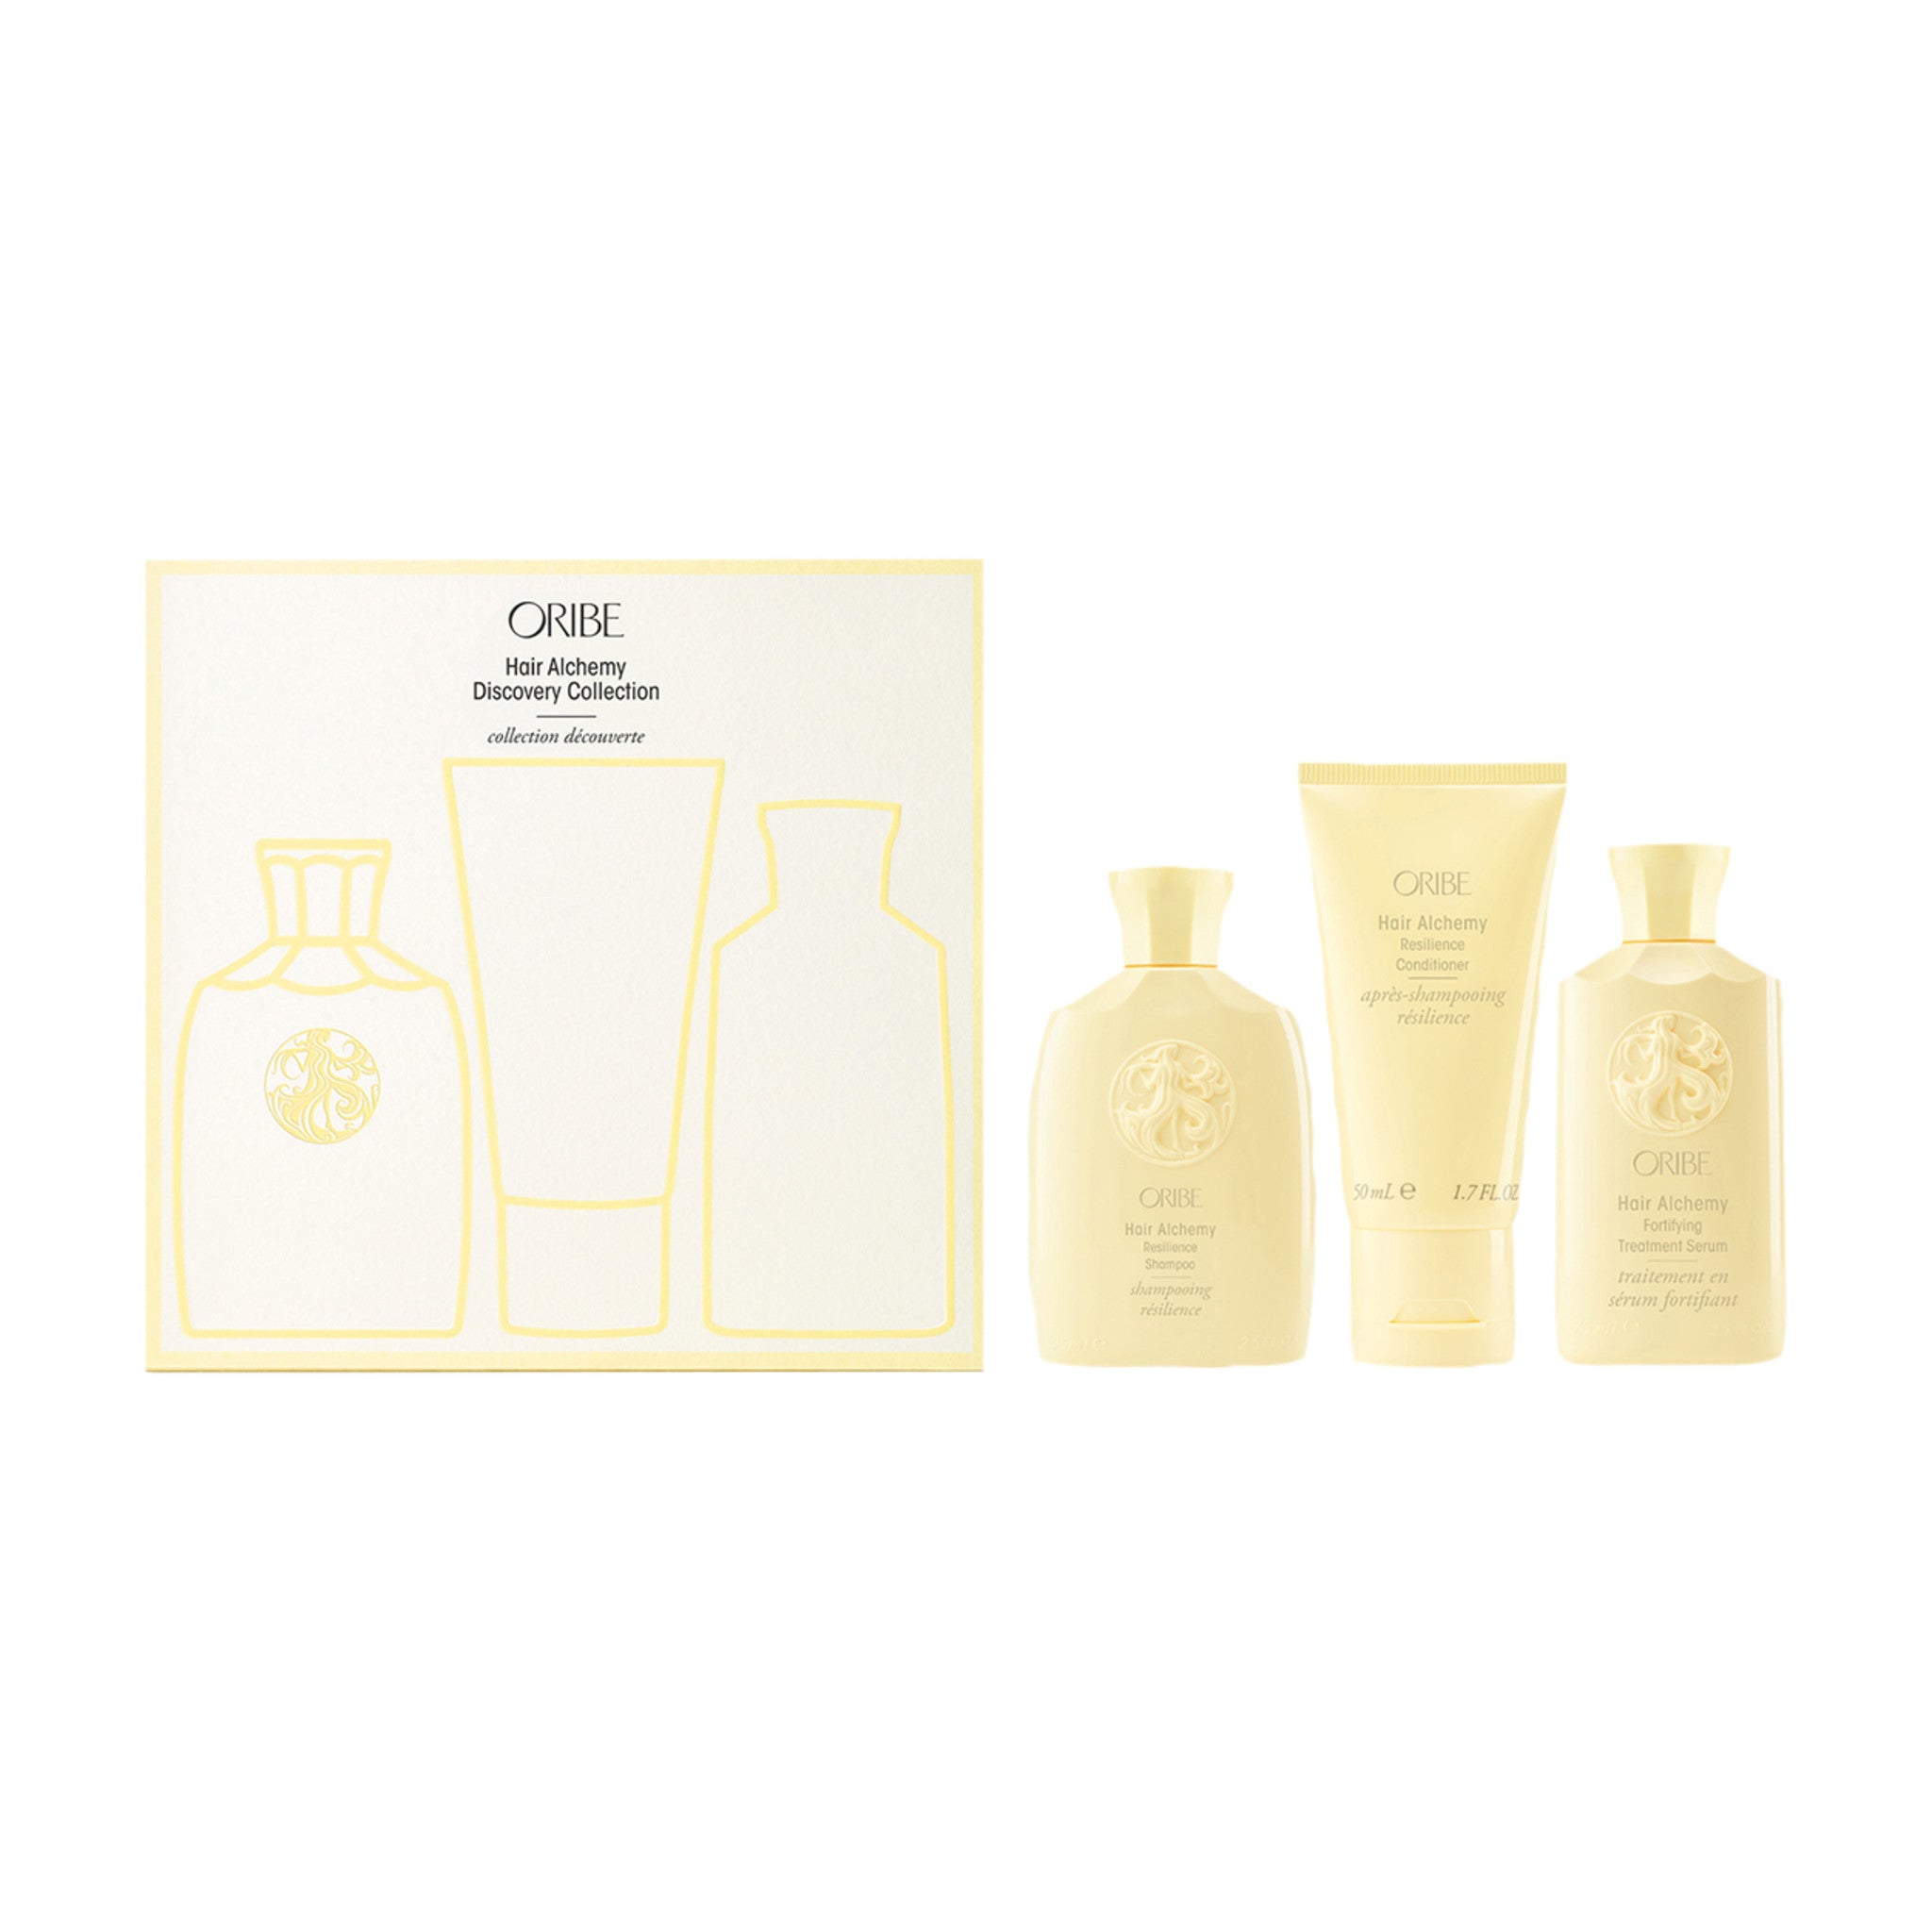 Oribe Hair Alchemy Discovery Collection Travel Set main image.